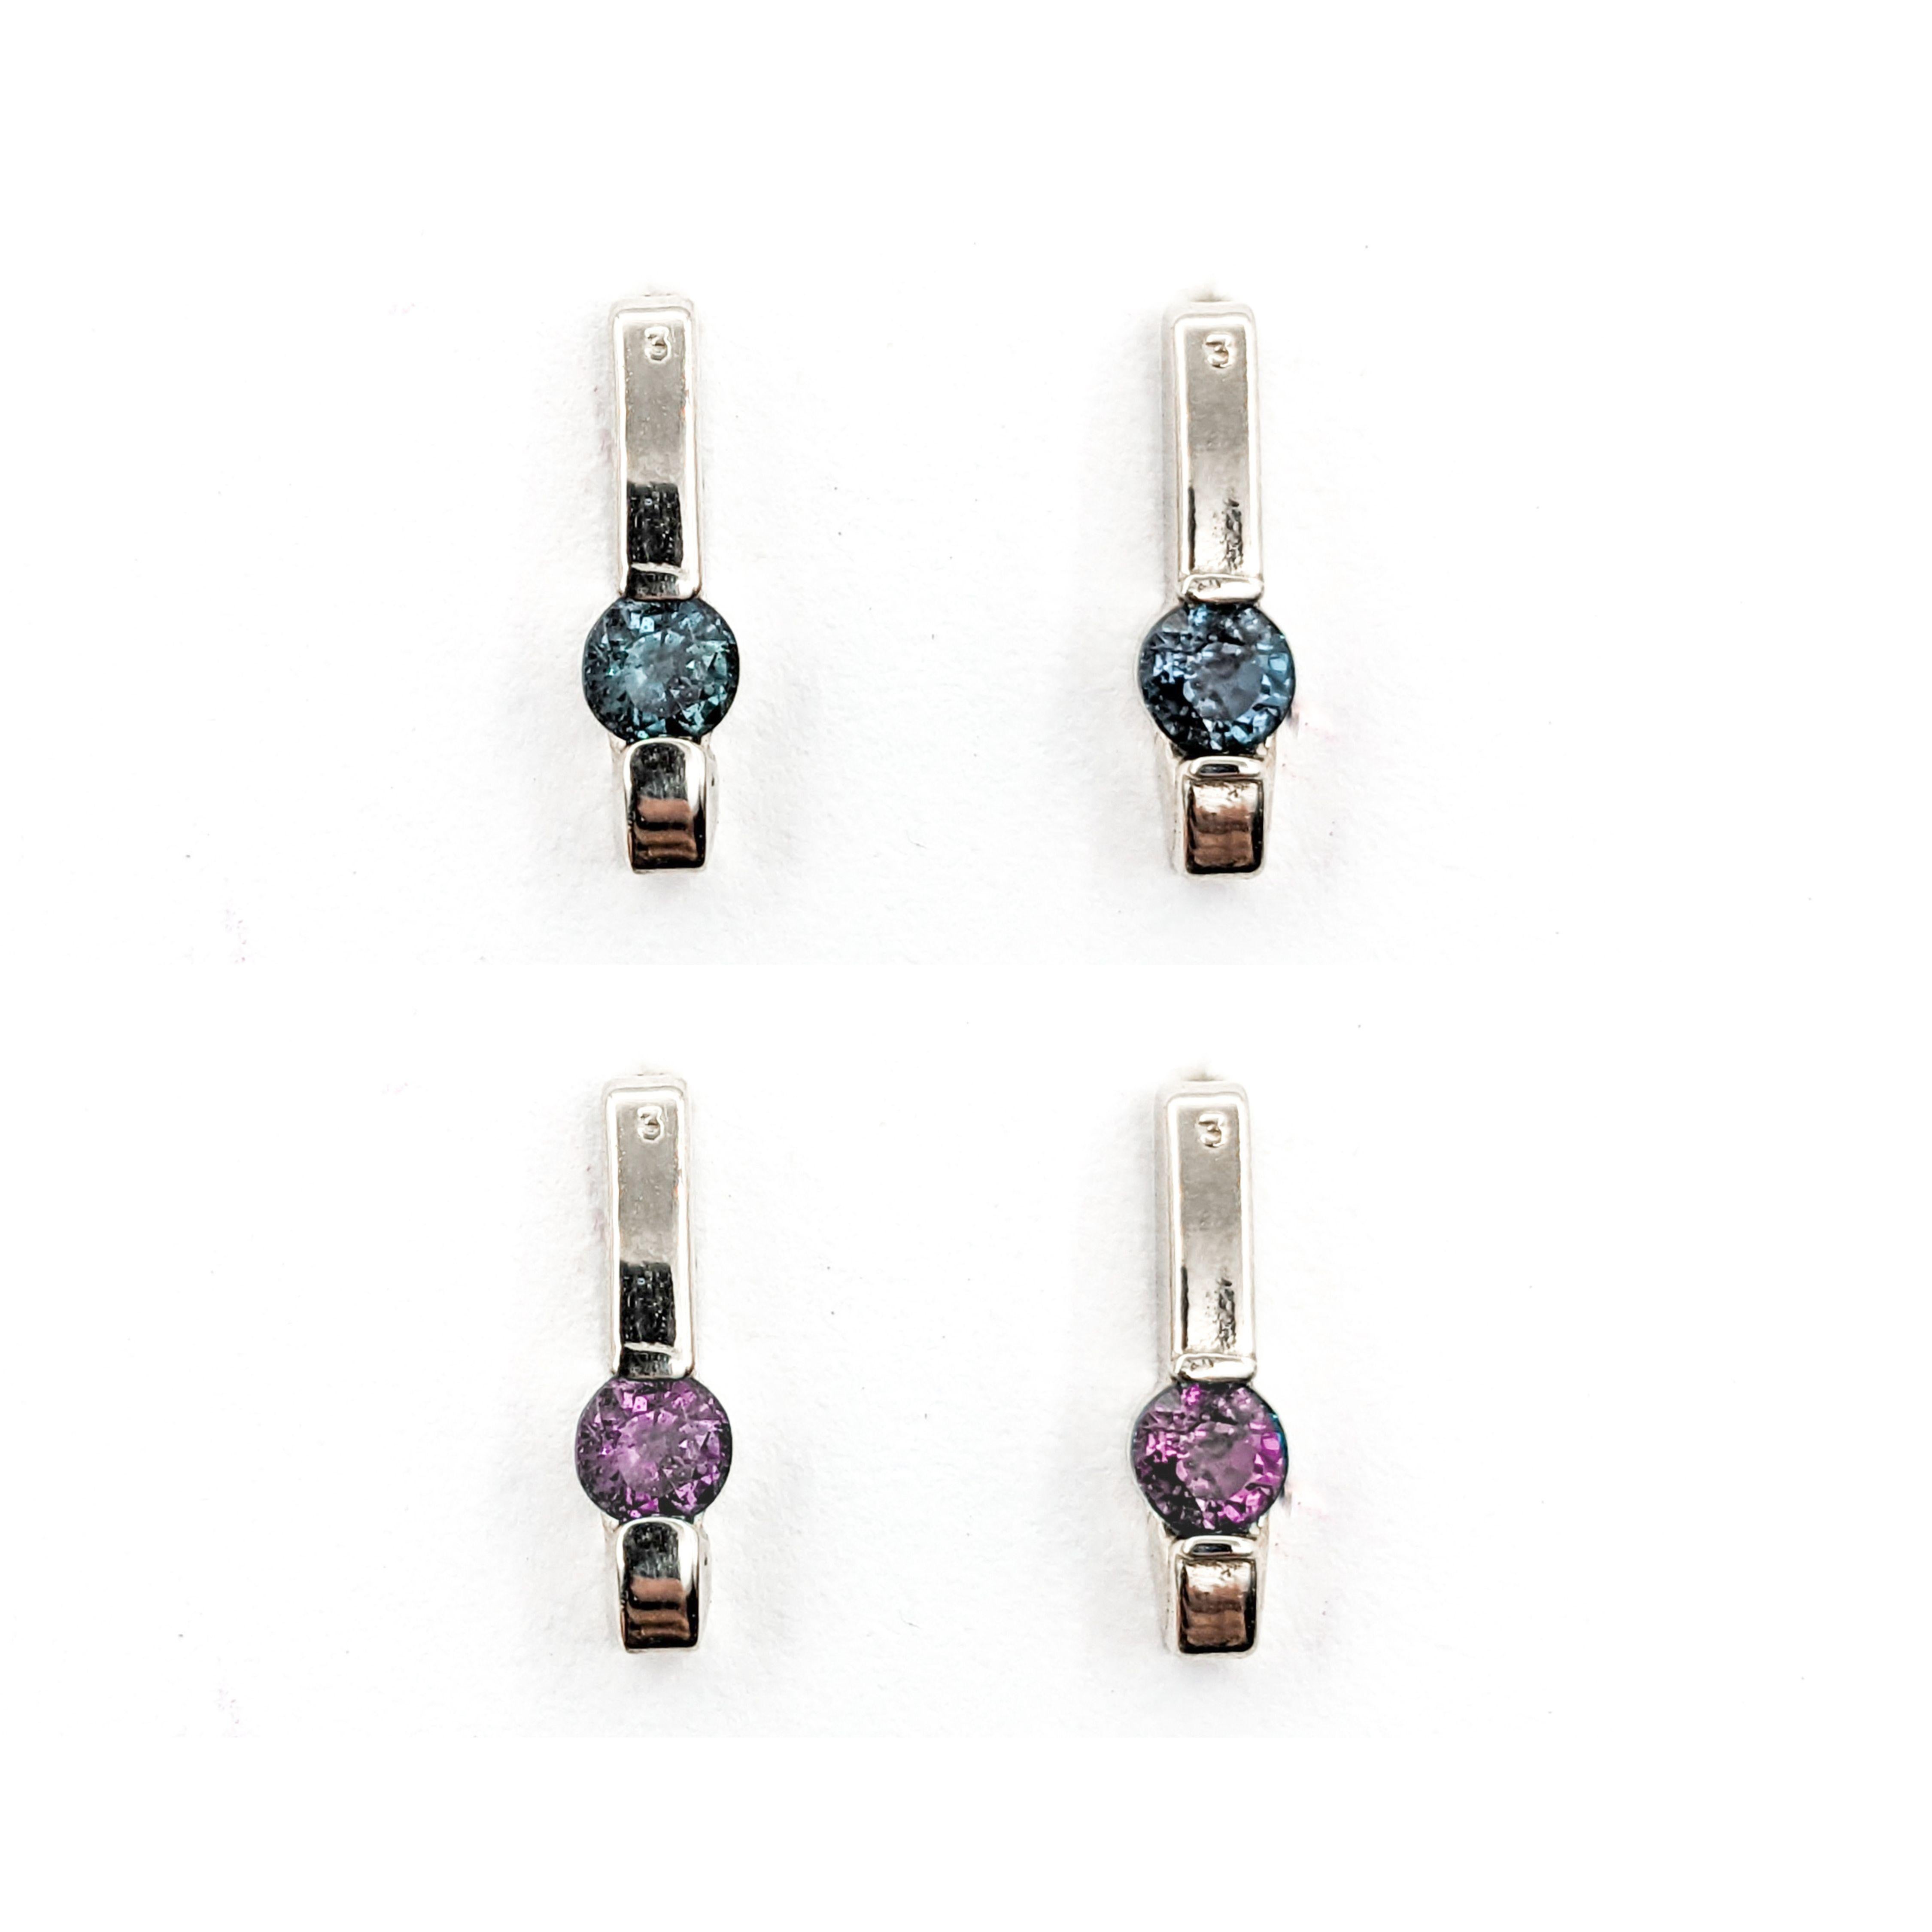 Delicate Natural Alexandrite Stud Earrings in White Gold

Introducing our stunning earrings, a masterpiece of design and craftsmanship in sleek 14k white gold. These elegant studs are highlighted by the enchanting beauty of 0.22 ctw natural